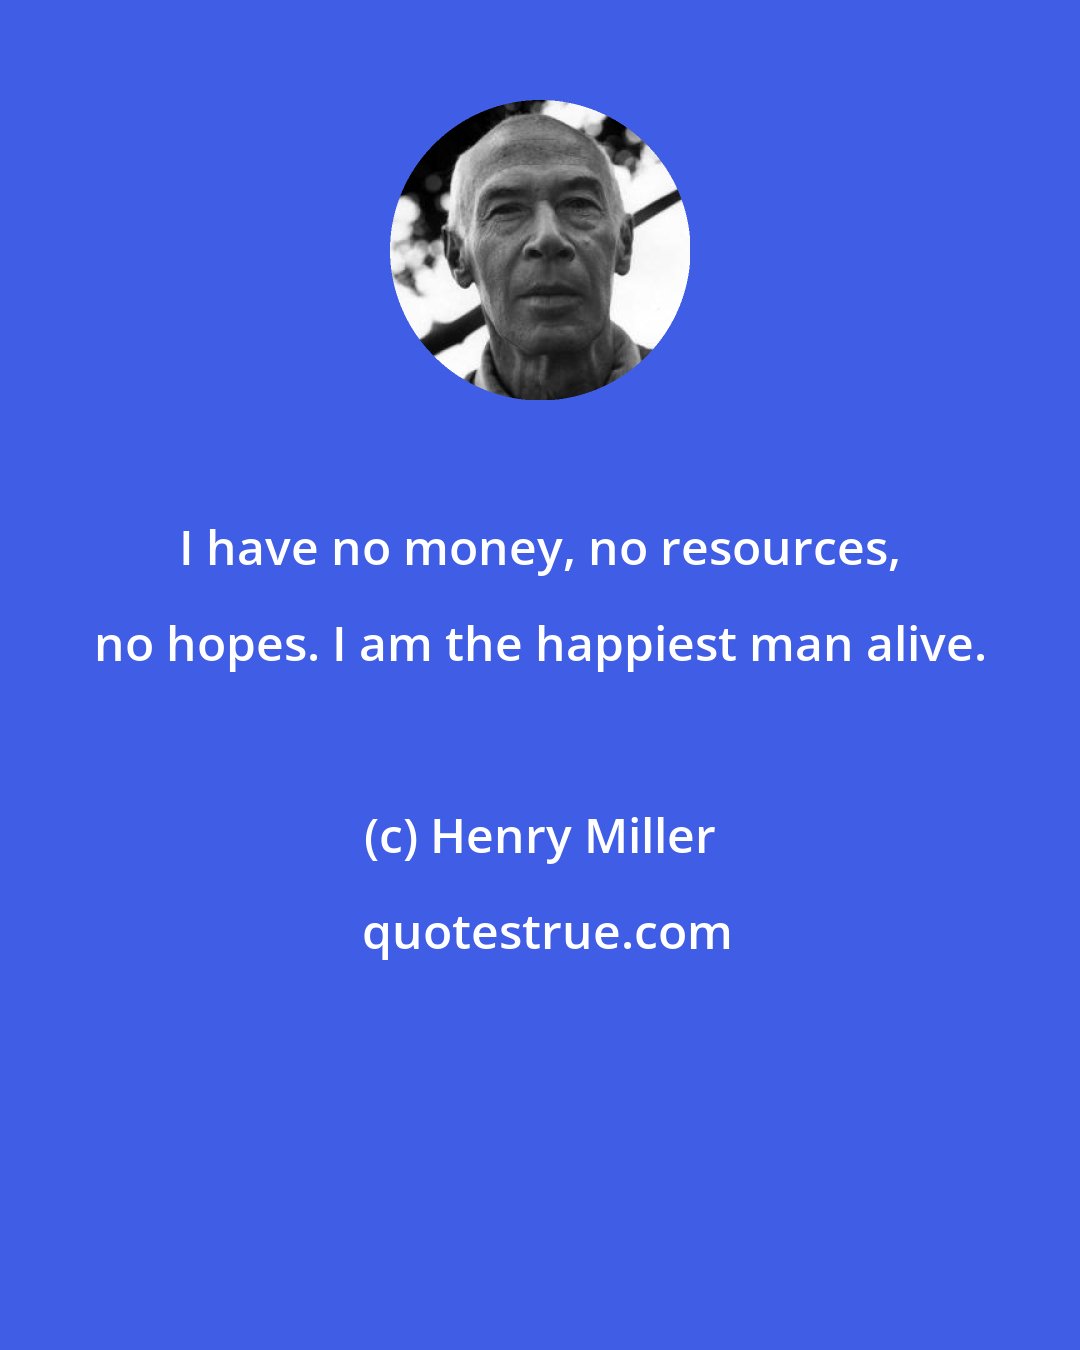 Henry Miller: I have no money, no resources, no hopes. I am the happiest man alive.